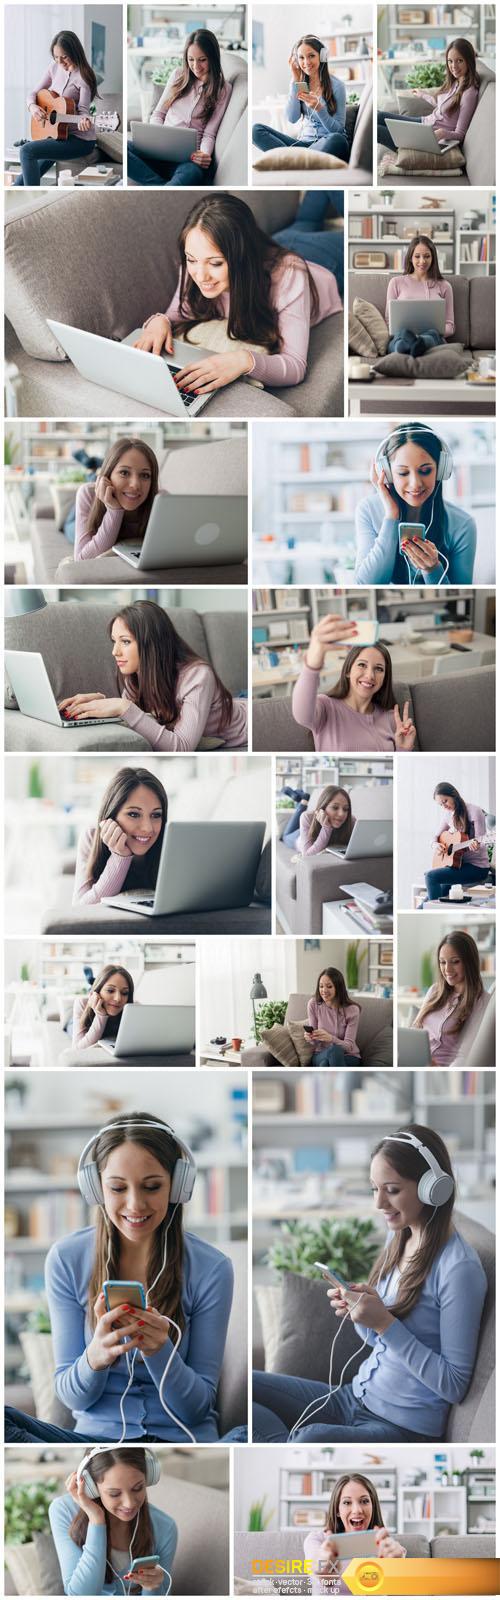 Beautiful young girl works with the smartphone and a laptop 2 - 20xUHQ JPEG Photo Stock